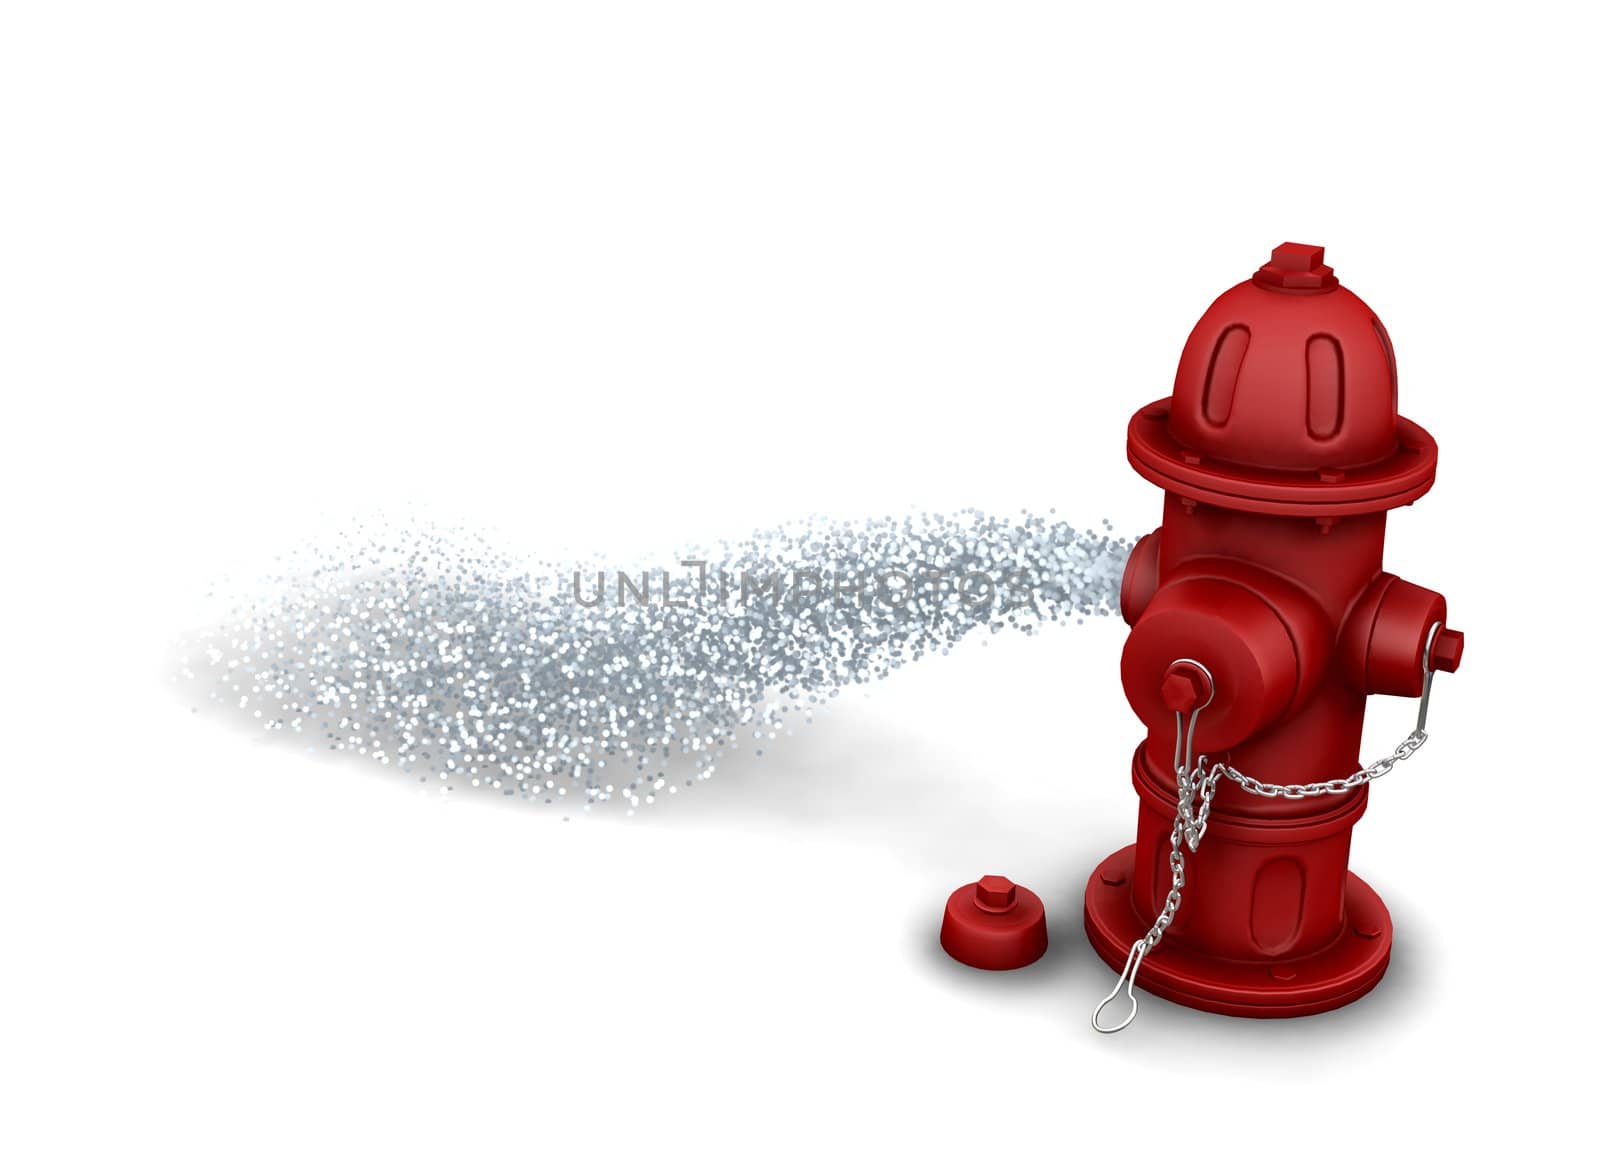 3D render of a fire hydrant